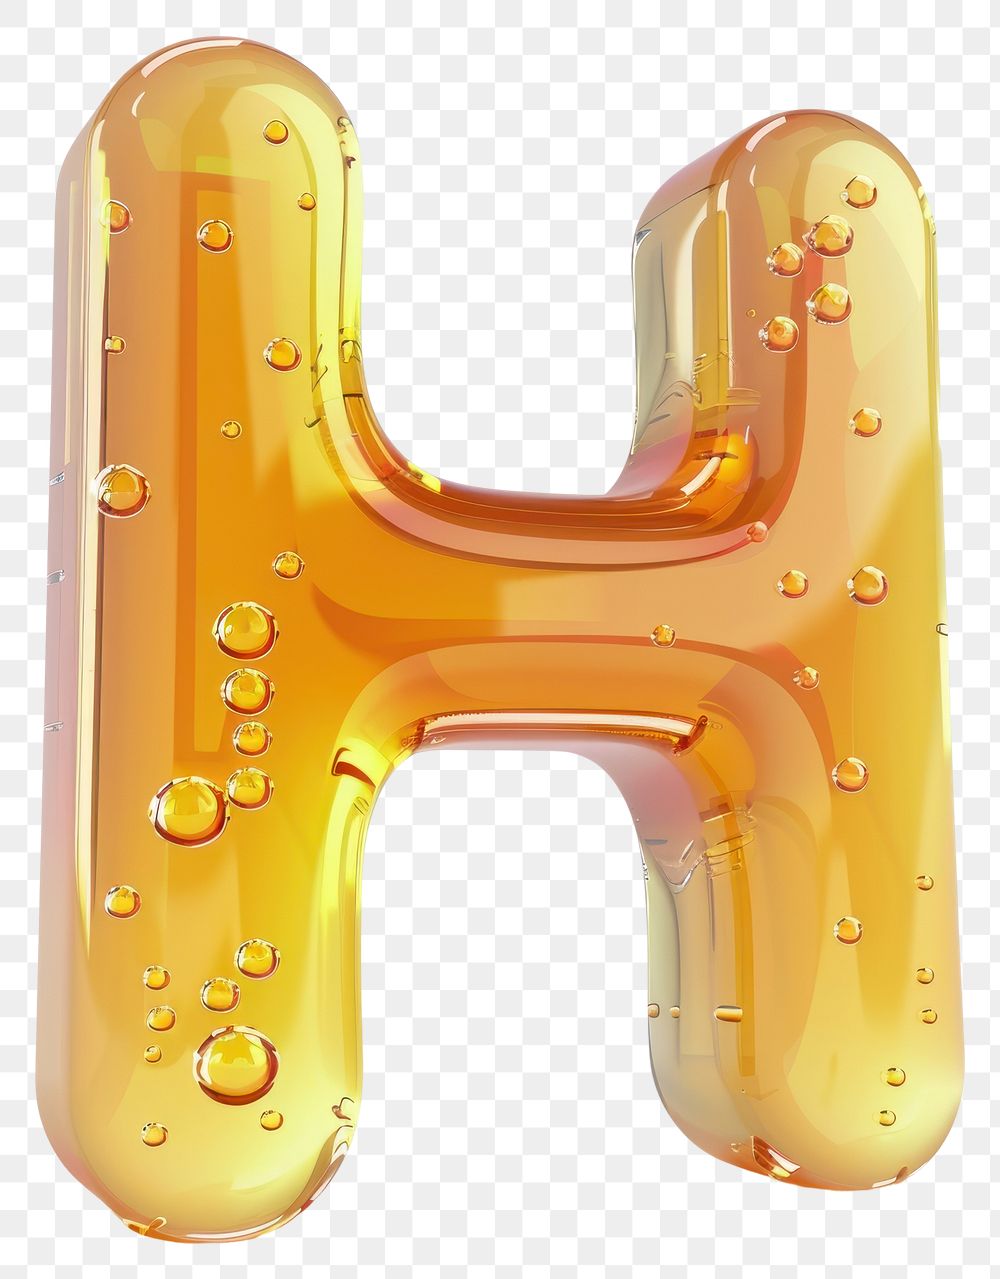 Letter H yellow number symbol.